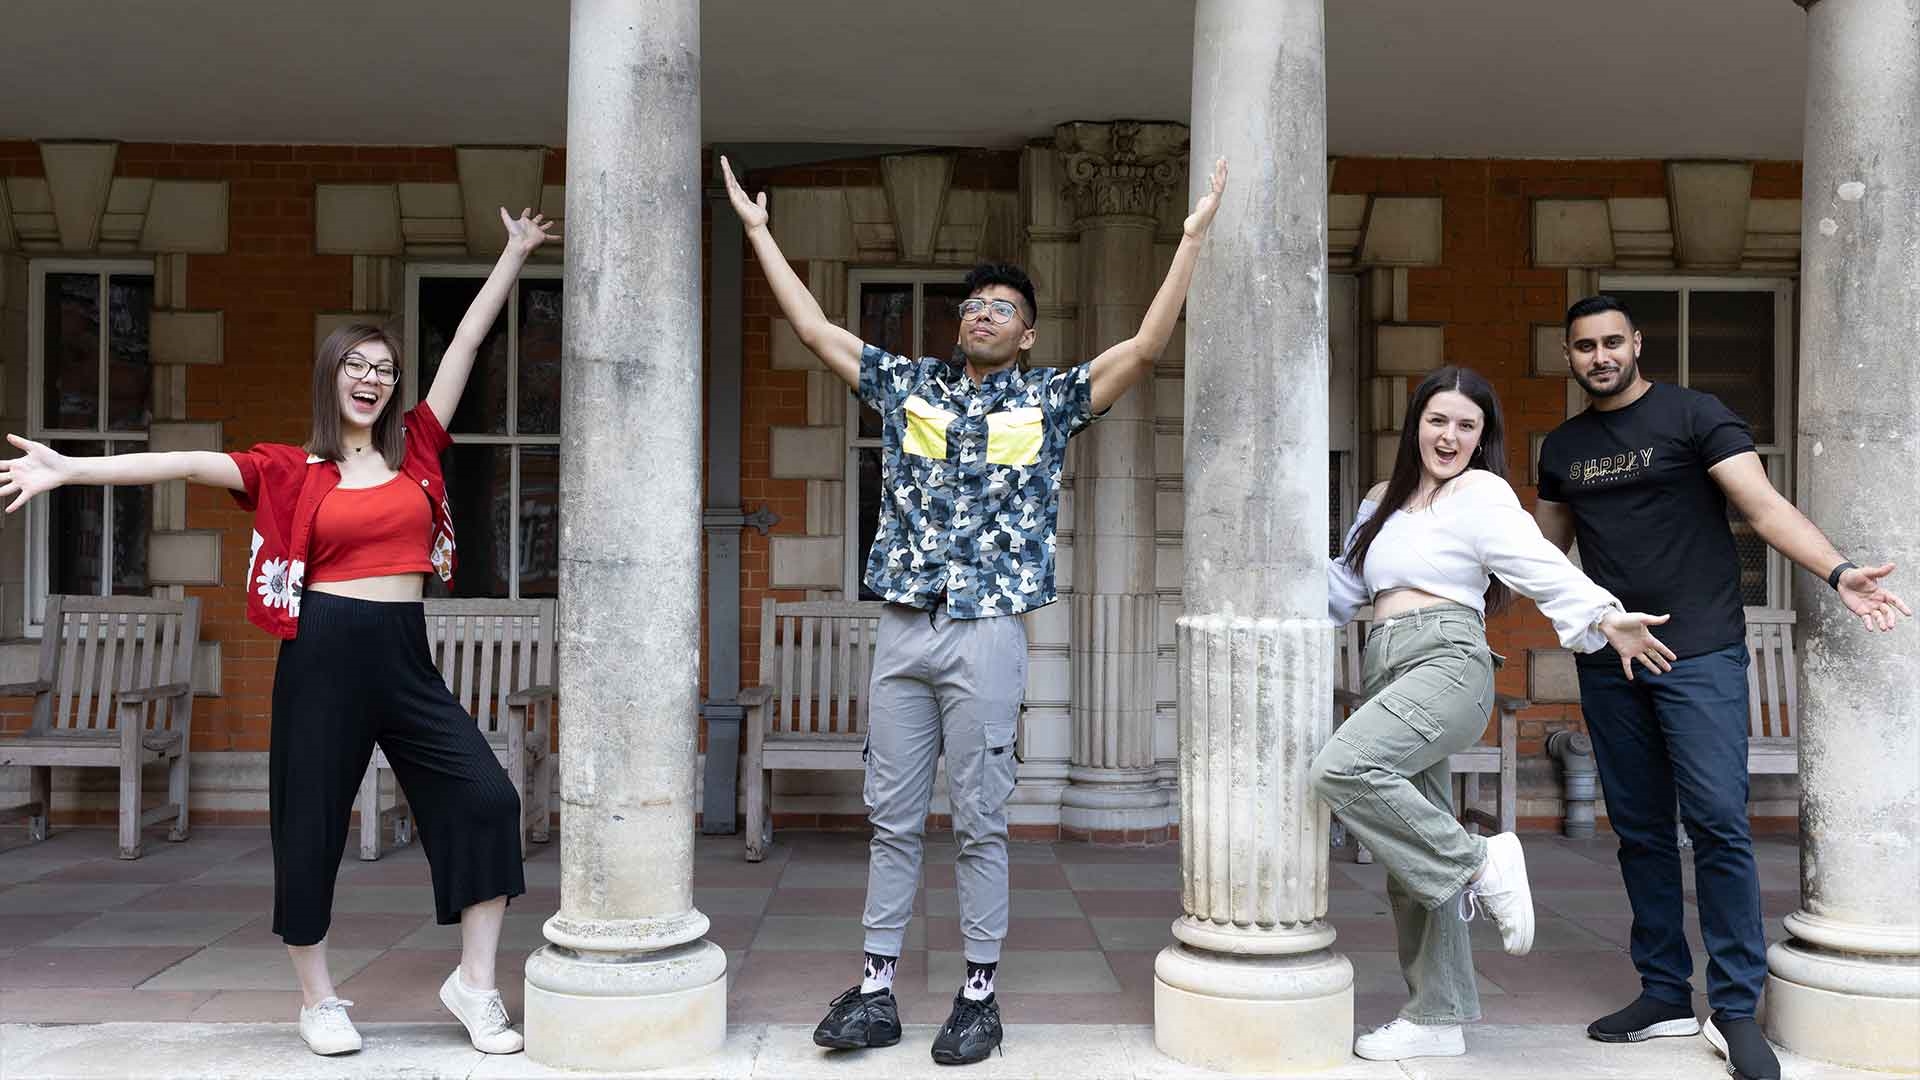 RHSU's 2022-23 Officers throwing their arms in the air by the columns in Founder's Quads